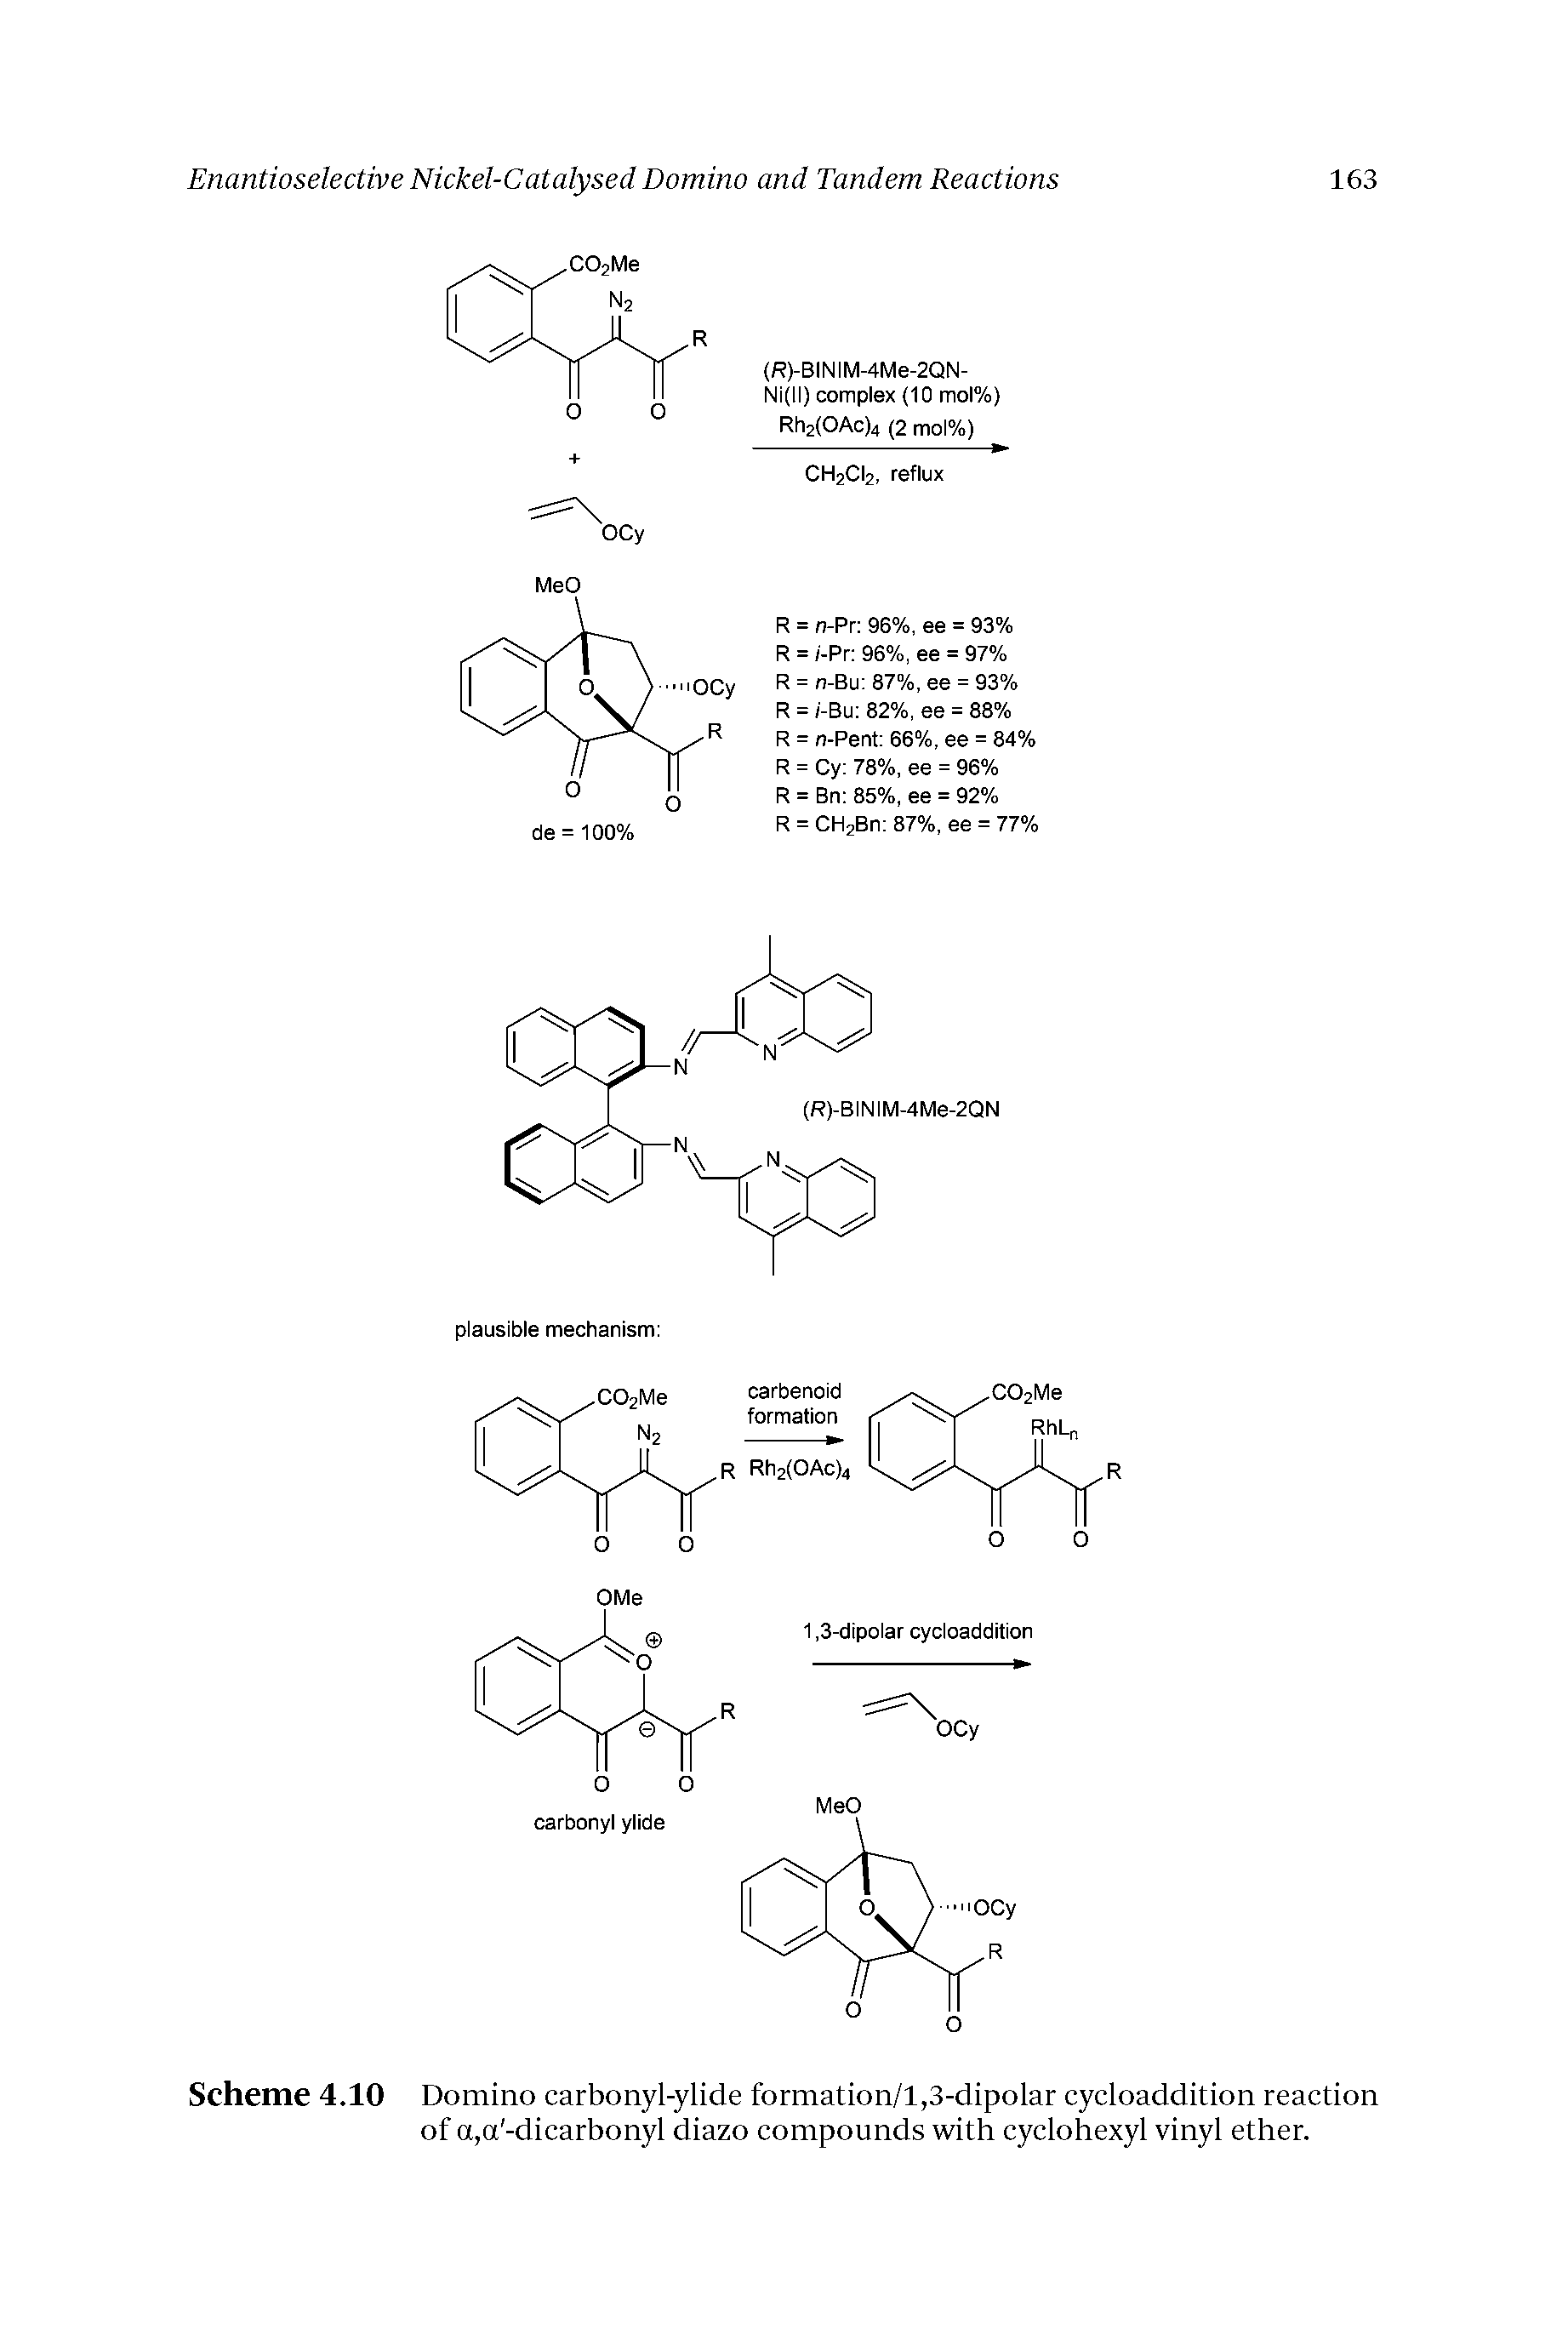 Scheme 4.10 Domino carbonyl-ylide formation/l,3-dipolar cycloaddition reaction of a,a -dicarbonyl diazo compounds with cyclohexyl vinyl ether.